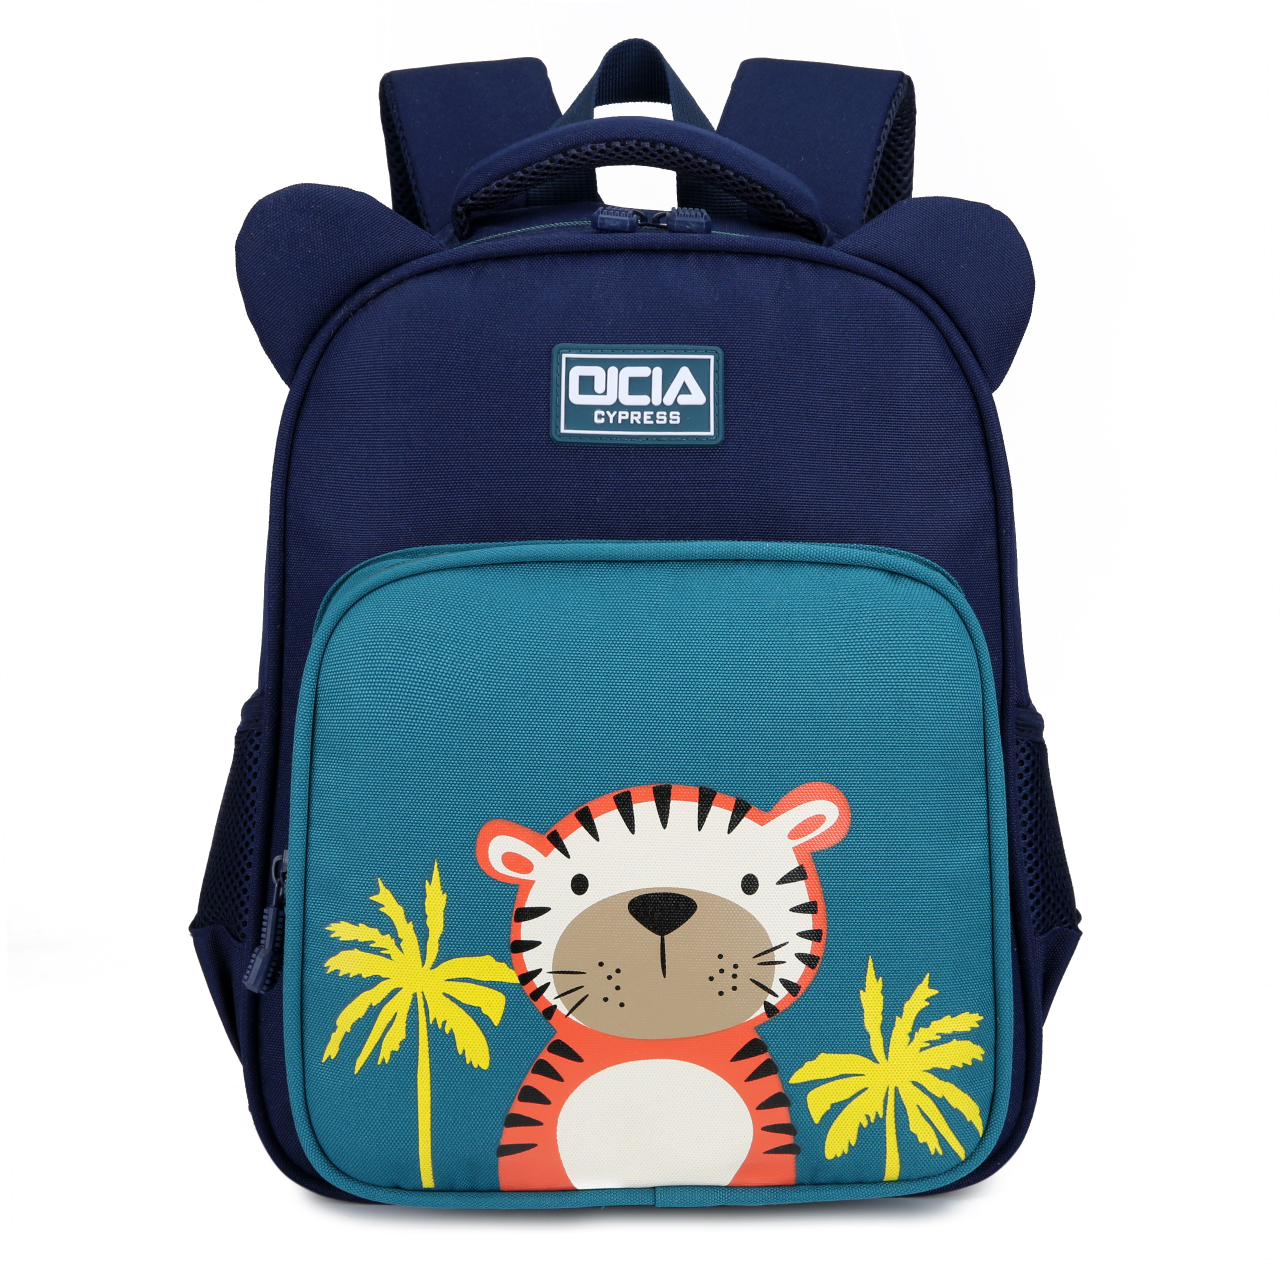 Studio Ghibli releases new plush toy backpacks for adults and children - Japan Today